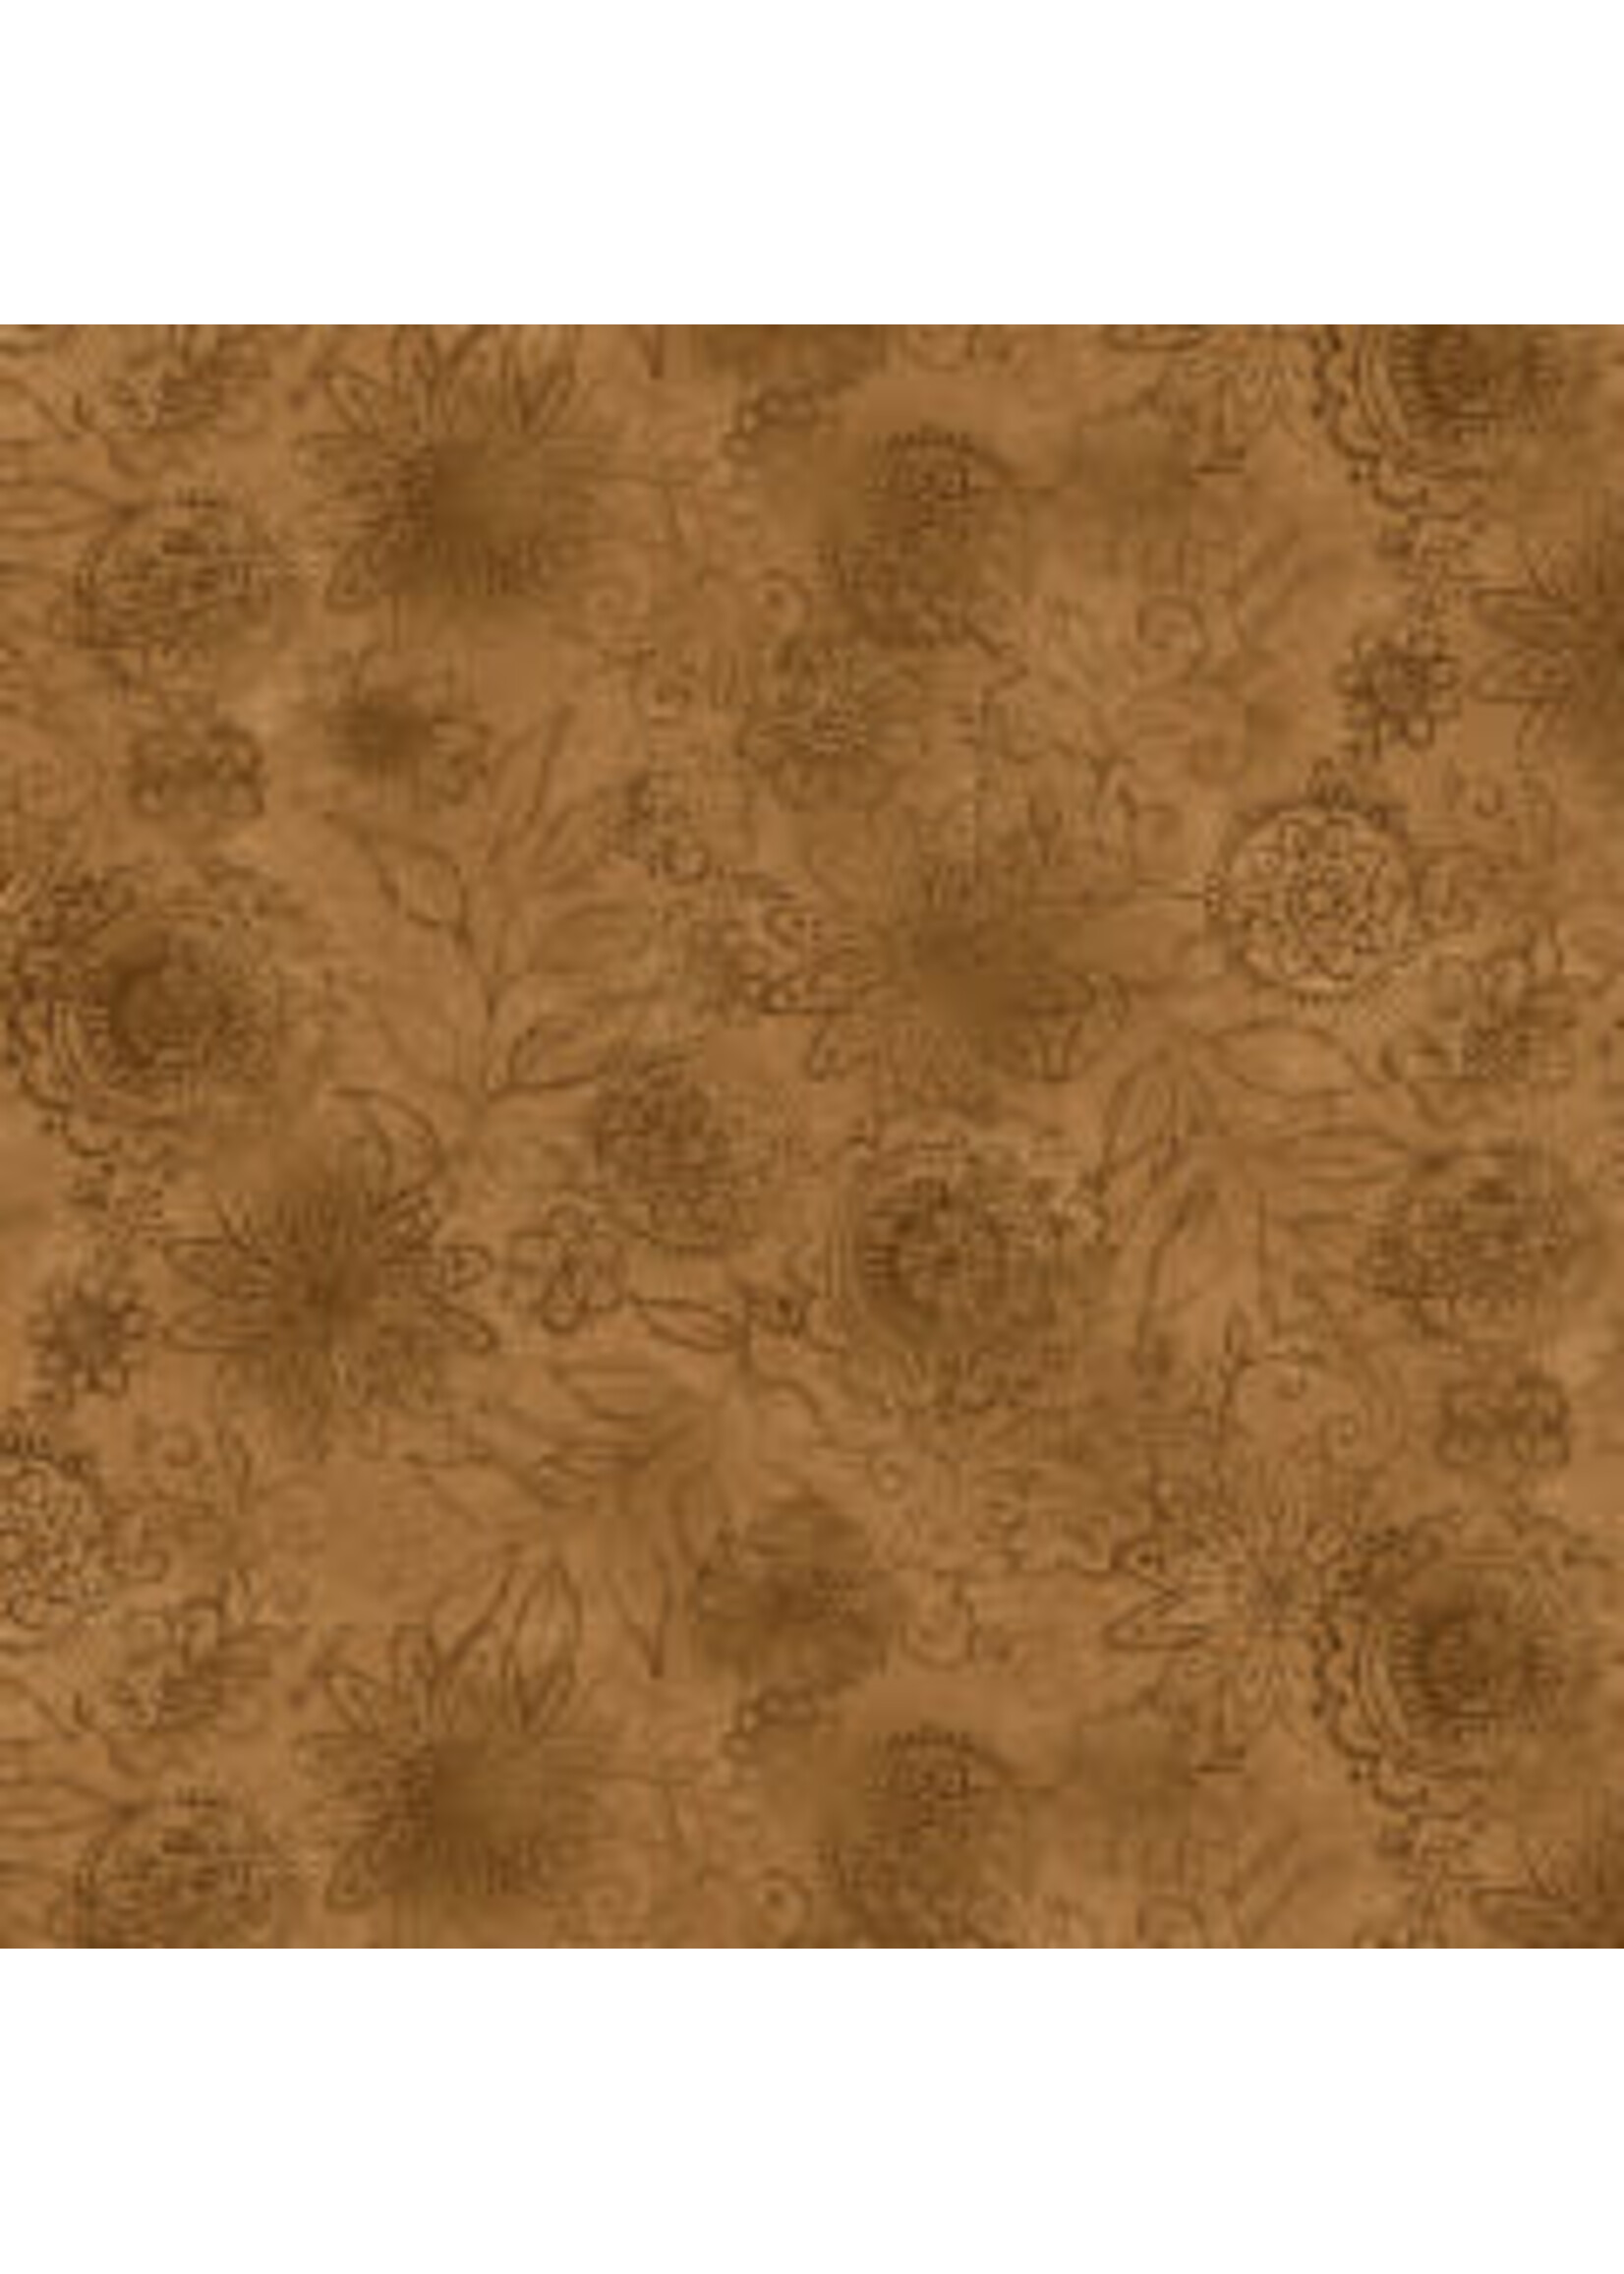 Best Of Days - Wall Flower - Gold - Coupon - 100 cm x 110 cm